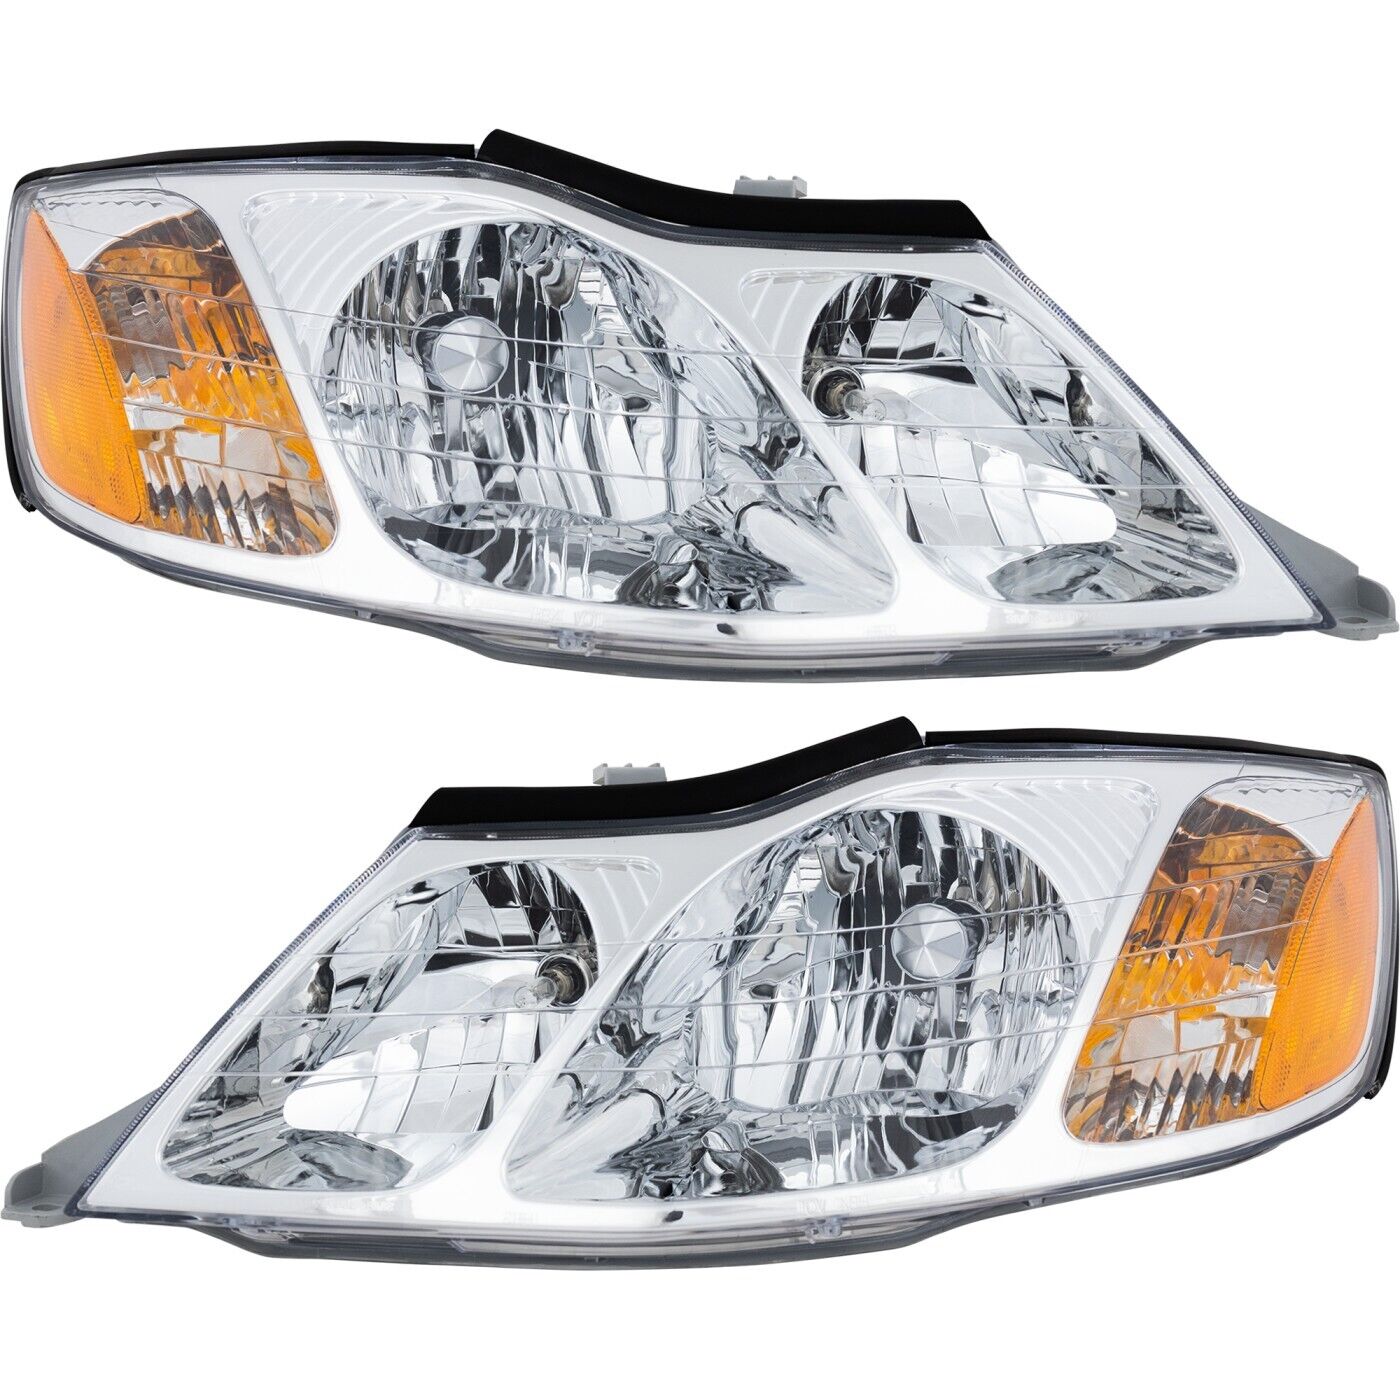 Headlight Assembly Set For 2000-2004 Toyota Avalon Left Right Halogen With Bulb